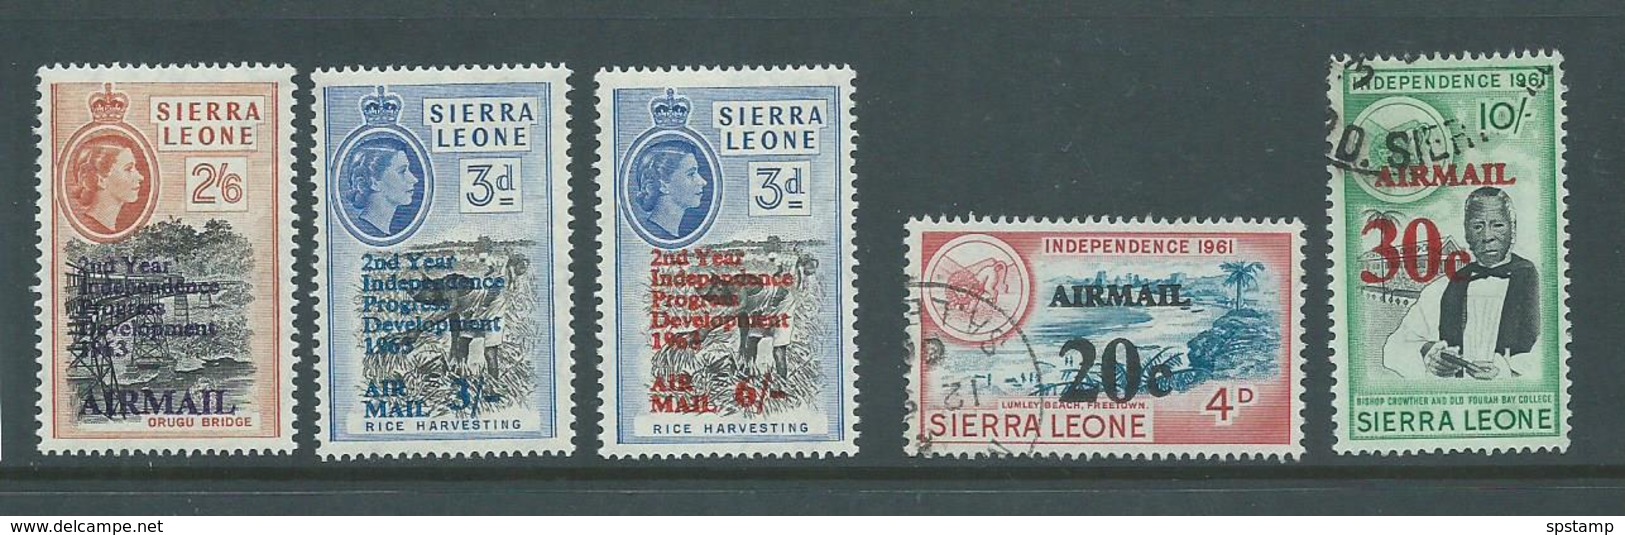 Sierra Leone 1963 - 64 Independence Airmails 3 Values MLH + 2 Airmail Surcharges FU - Sierra Leone (1961-...)